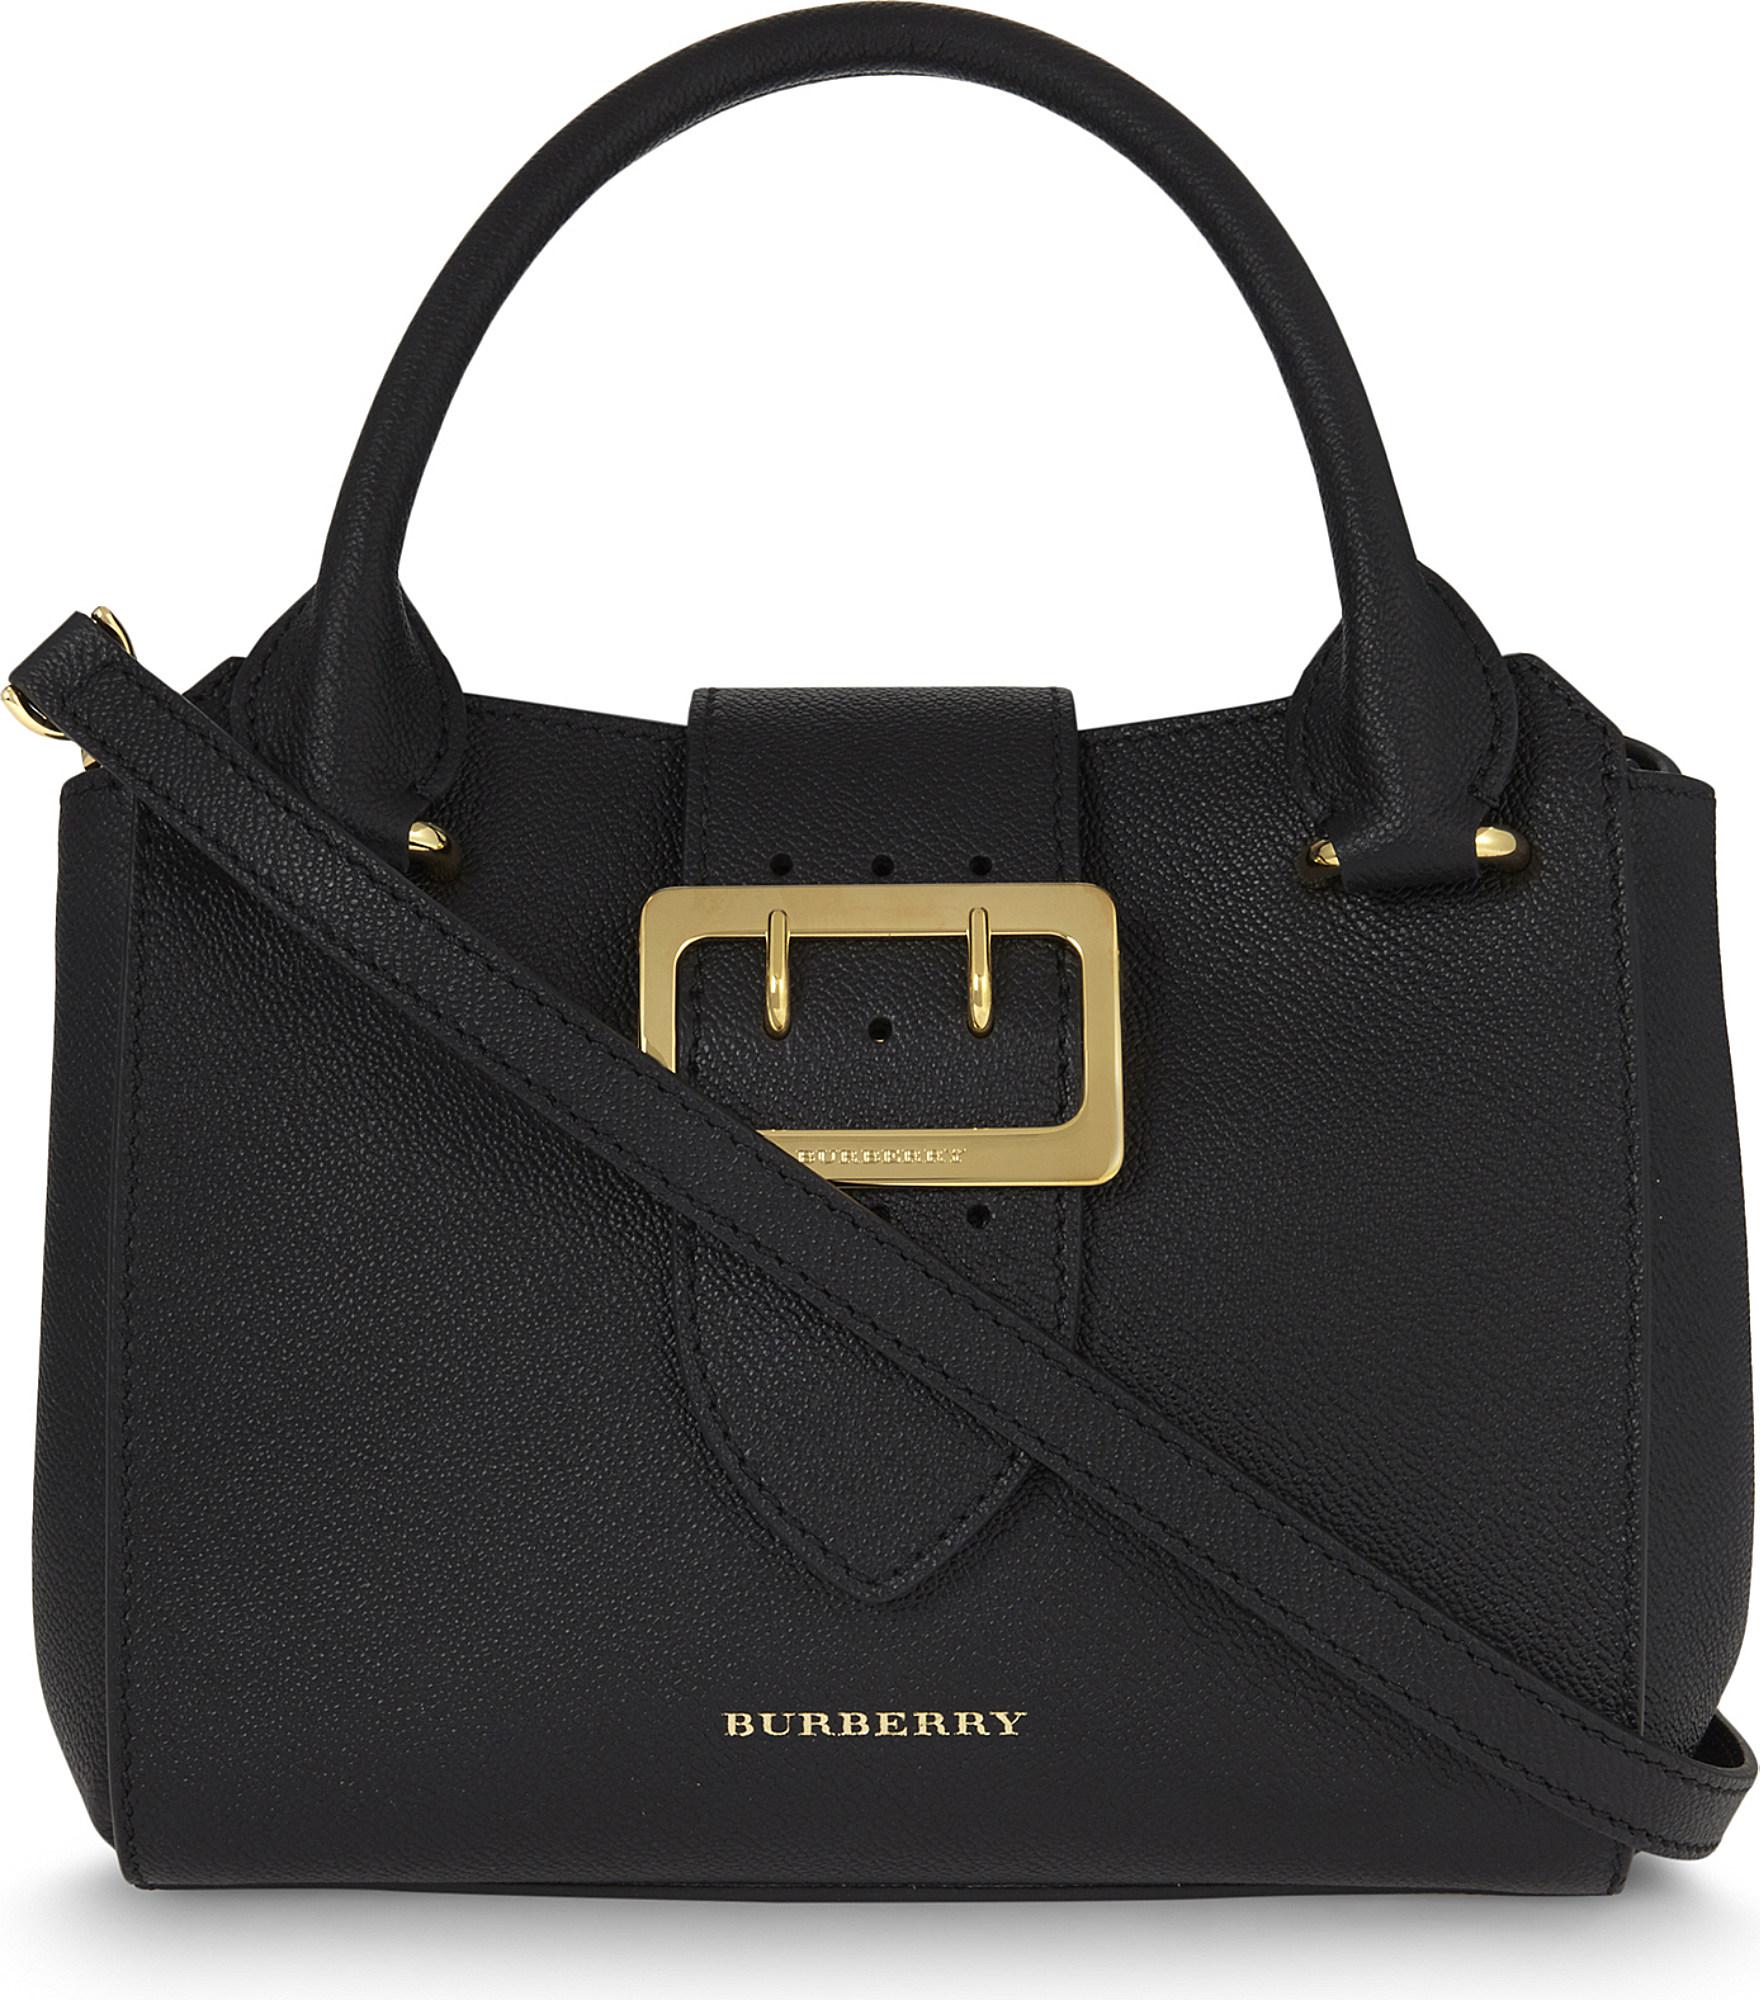 Lyst - Burberry Buckle Small Leather Tote Bag in Black